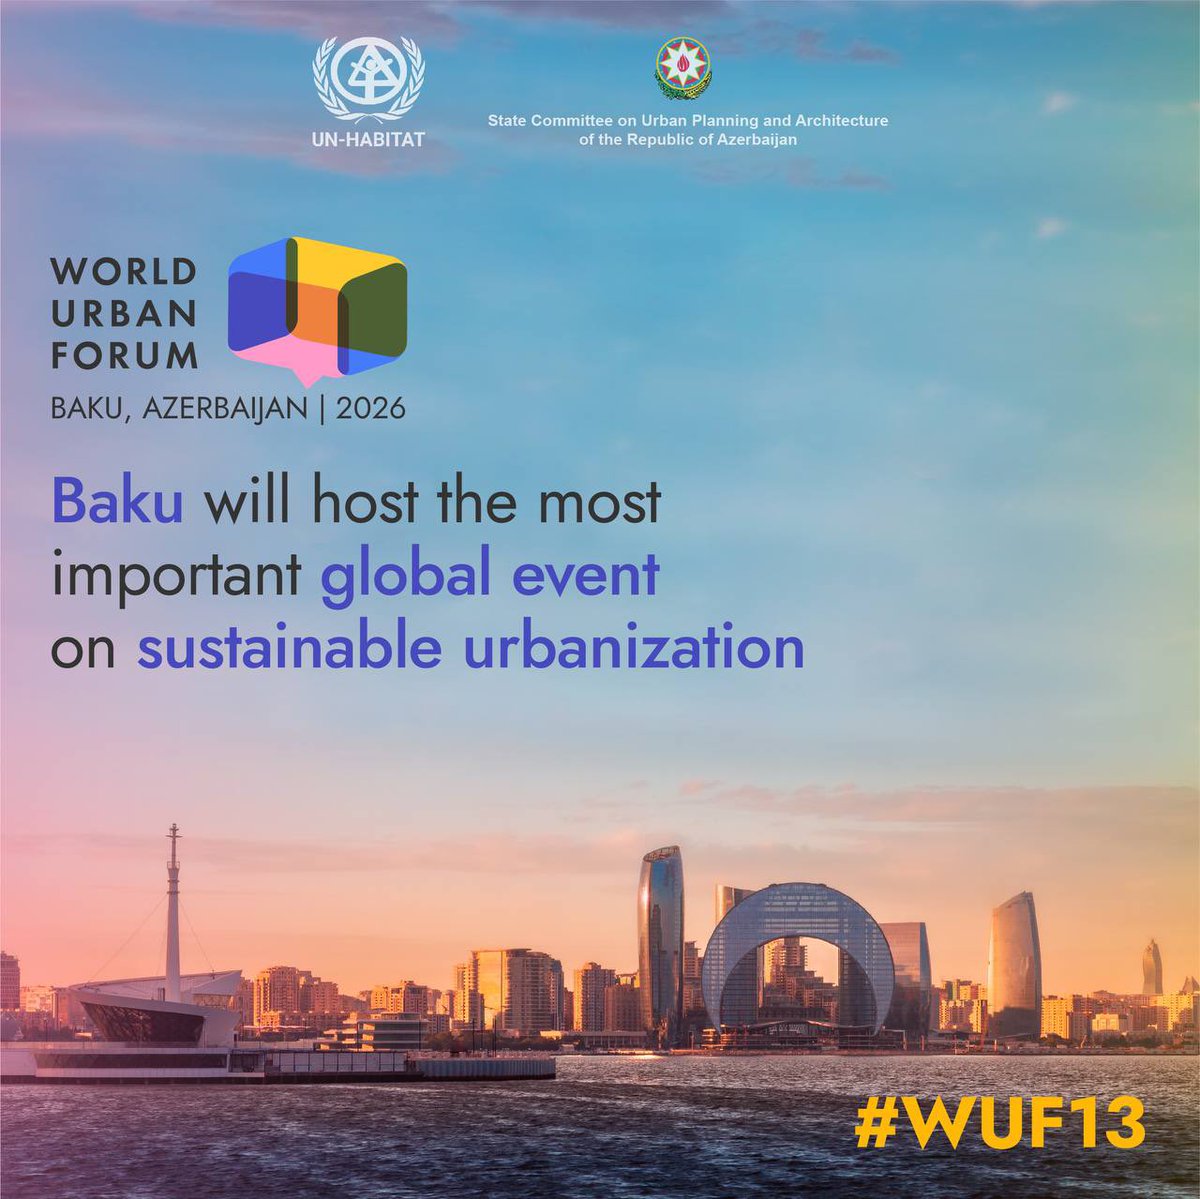 Honored to announce that #Baku will be the proud host of the 13th #WorldUrbanForum (#WUF13) in 2026! Get ready for engaging dialogues, groundbreaking innovation, and a focus on sustainable #urban development in our vibrant city! Join us in shaping the urban future. 

#Baku